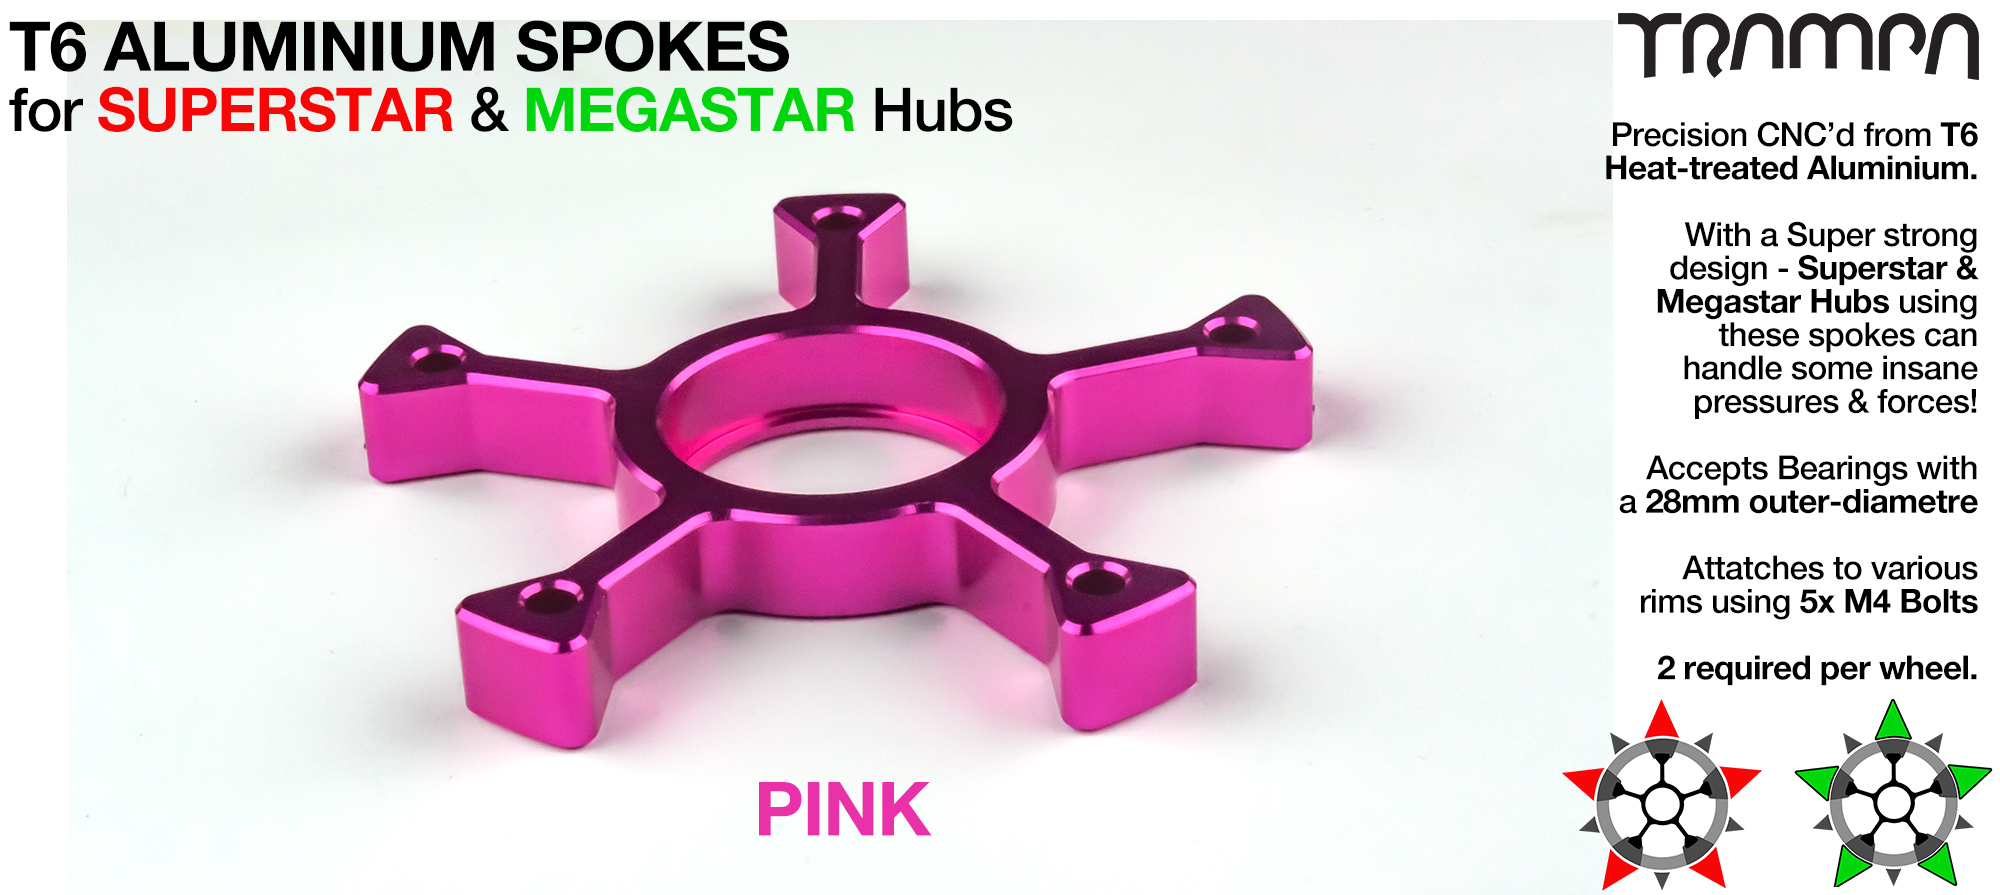 CLASSIC Spokes - PINK 